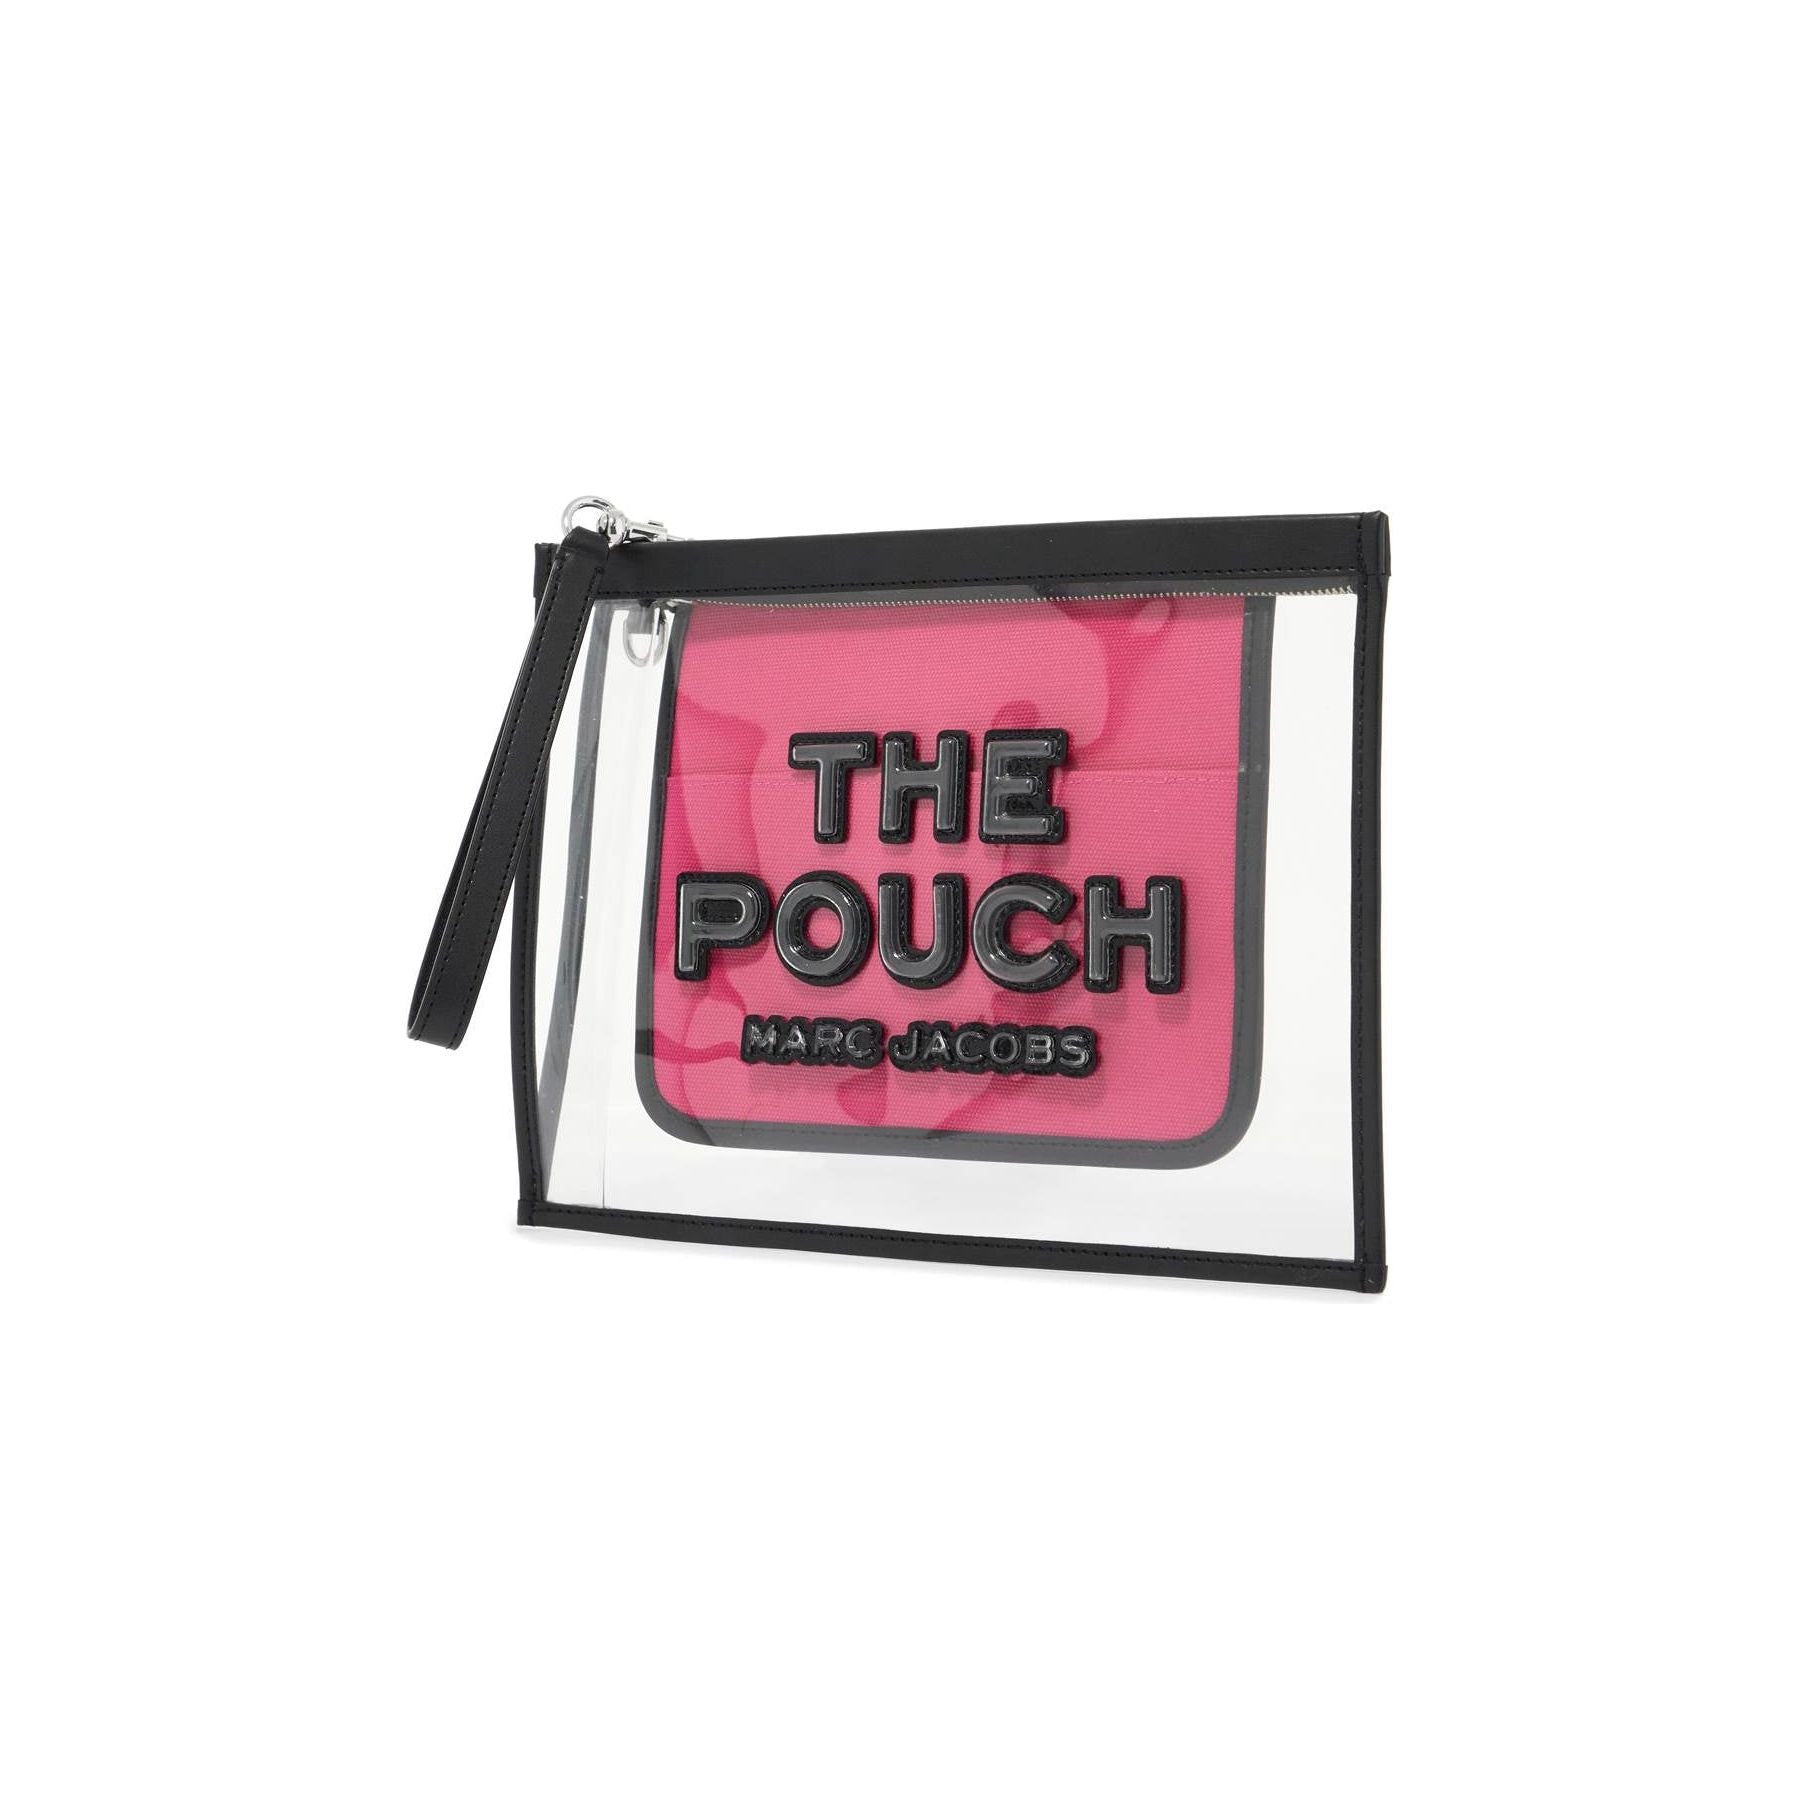 The Clear Large Pouch